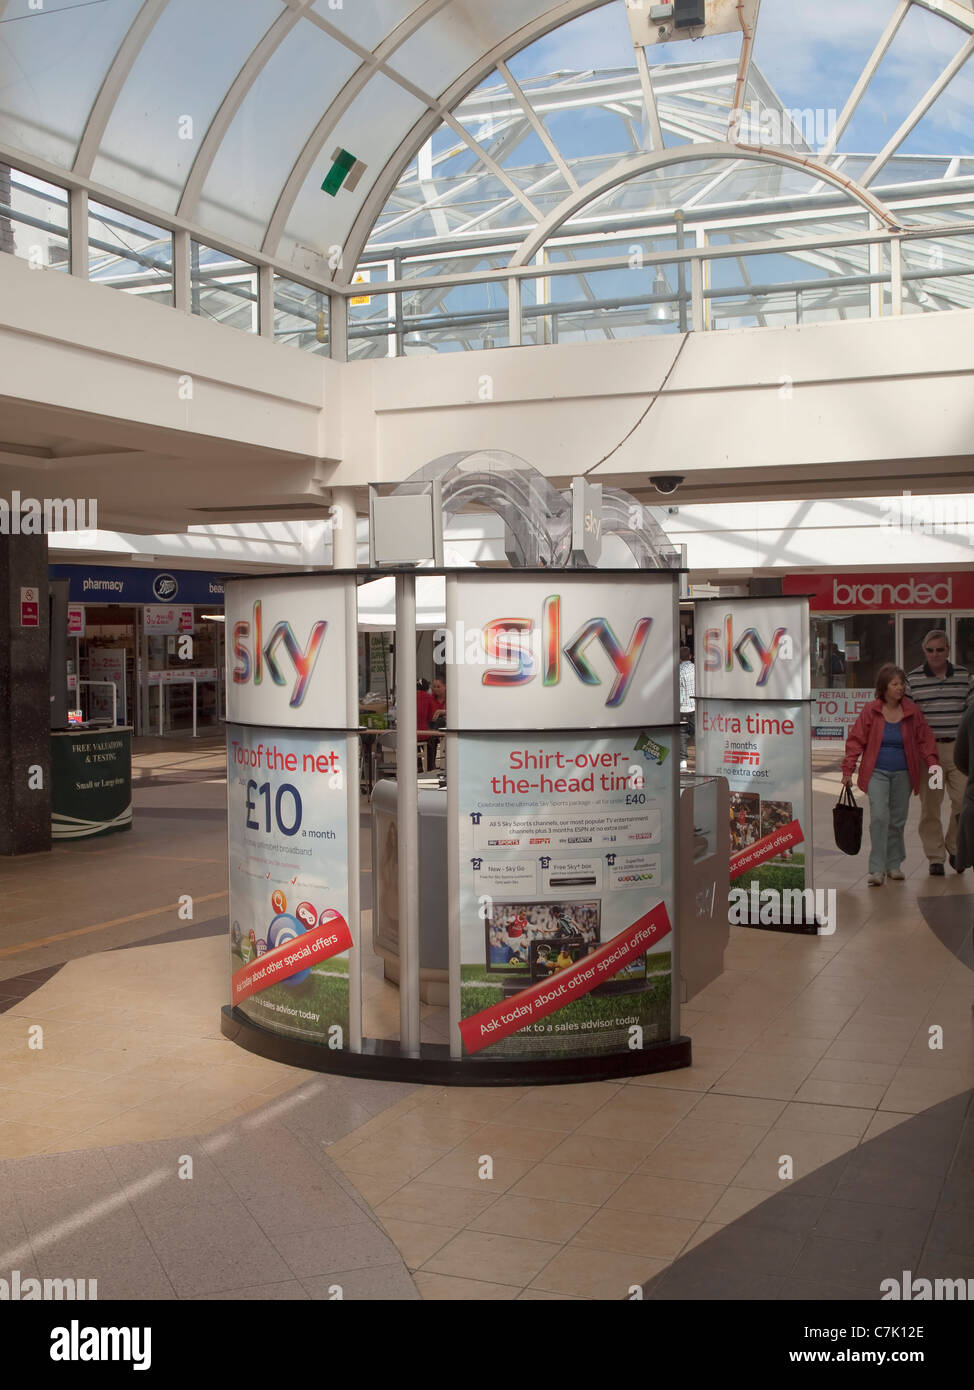 Sky TV promotional and sales booth in the Winsford Cross shopping centre, Winsford, Cheshire Stock Photo